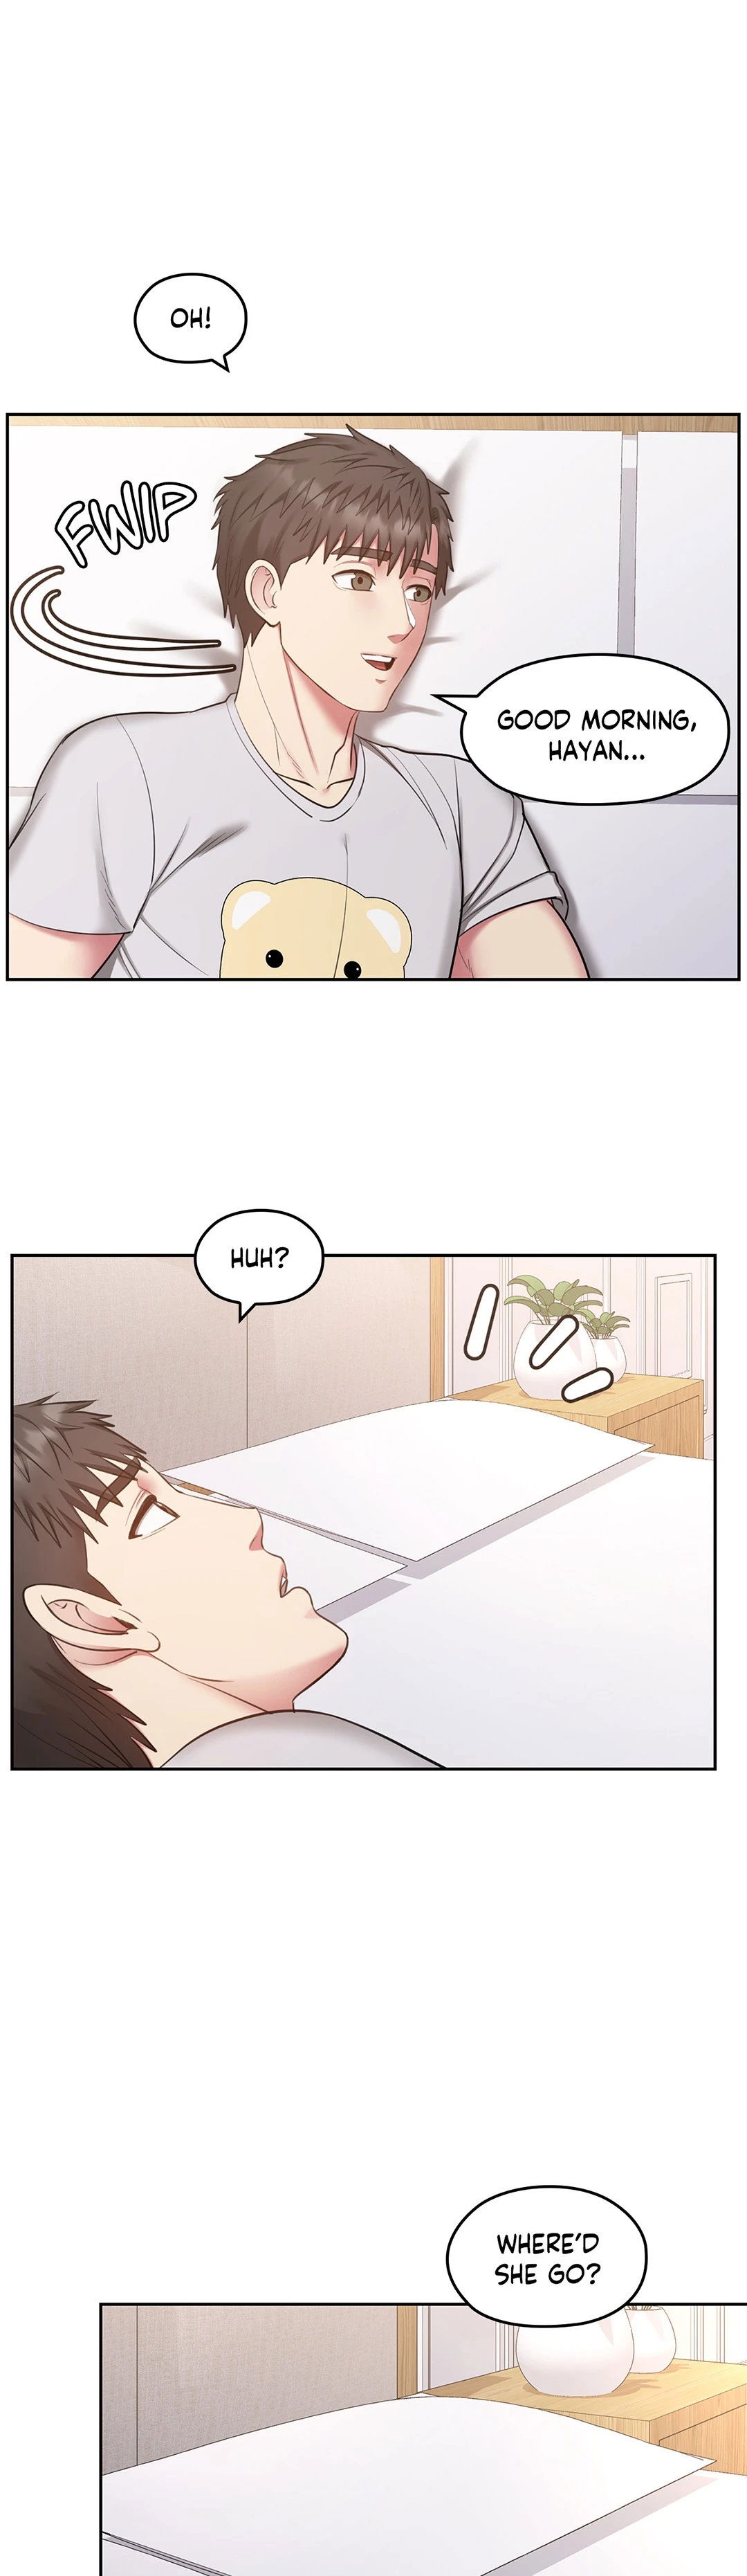 sexual-consulting-chap-32-17